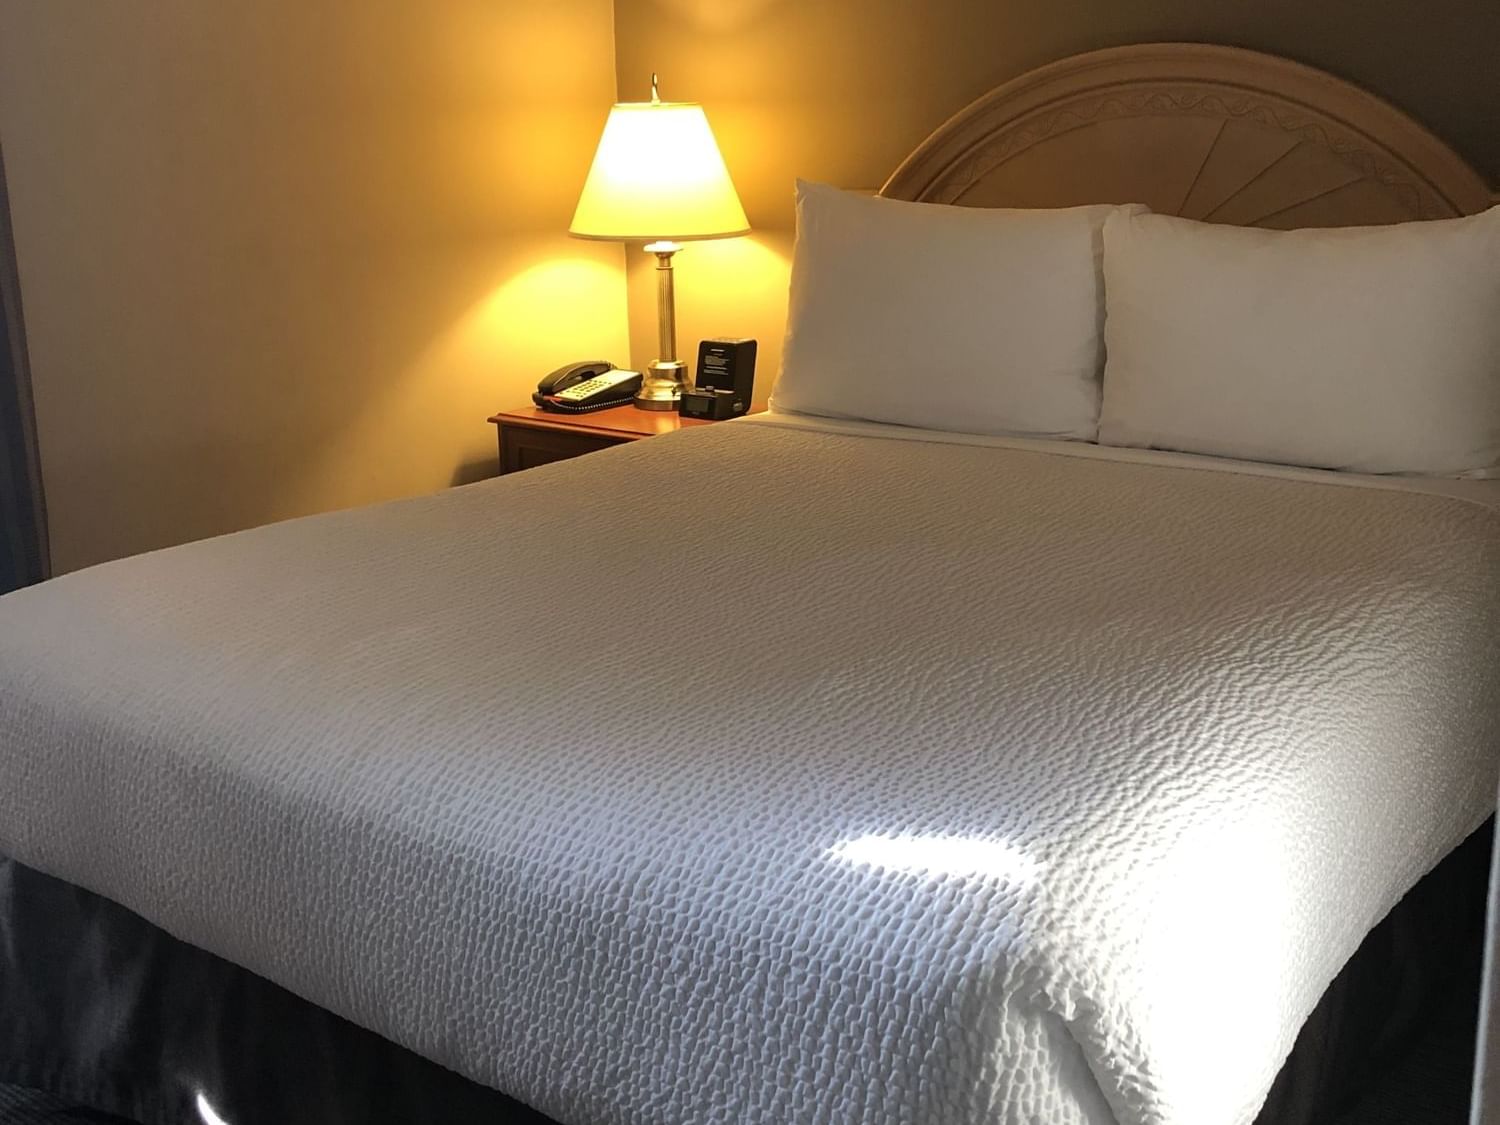 Cozy bed with lamp in One Bedroom Suite at Hotels in Fort McMurray